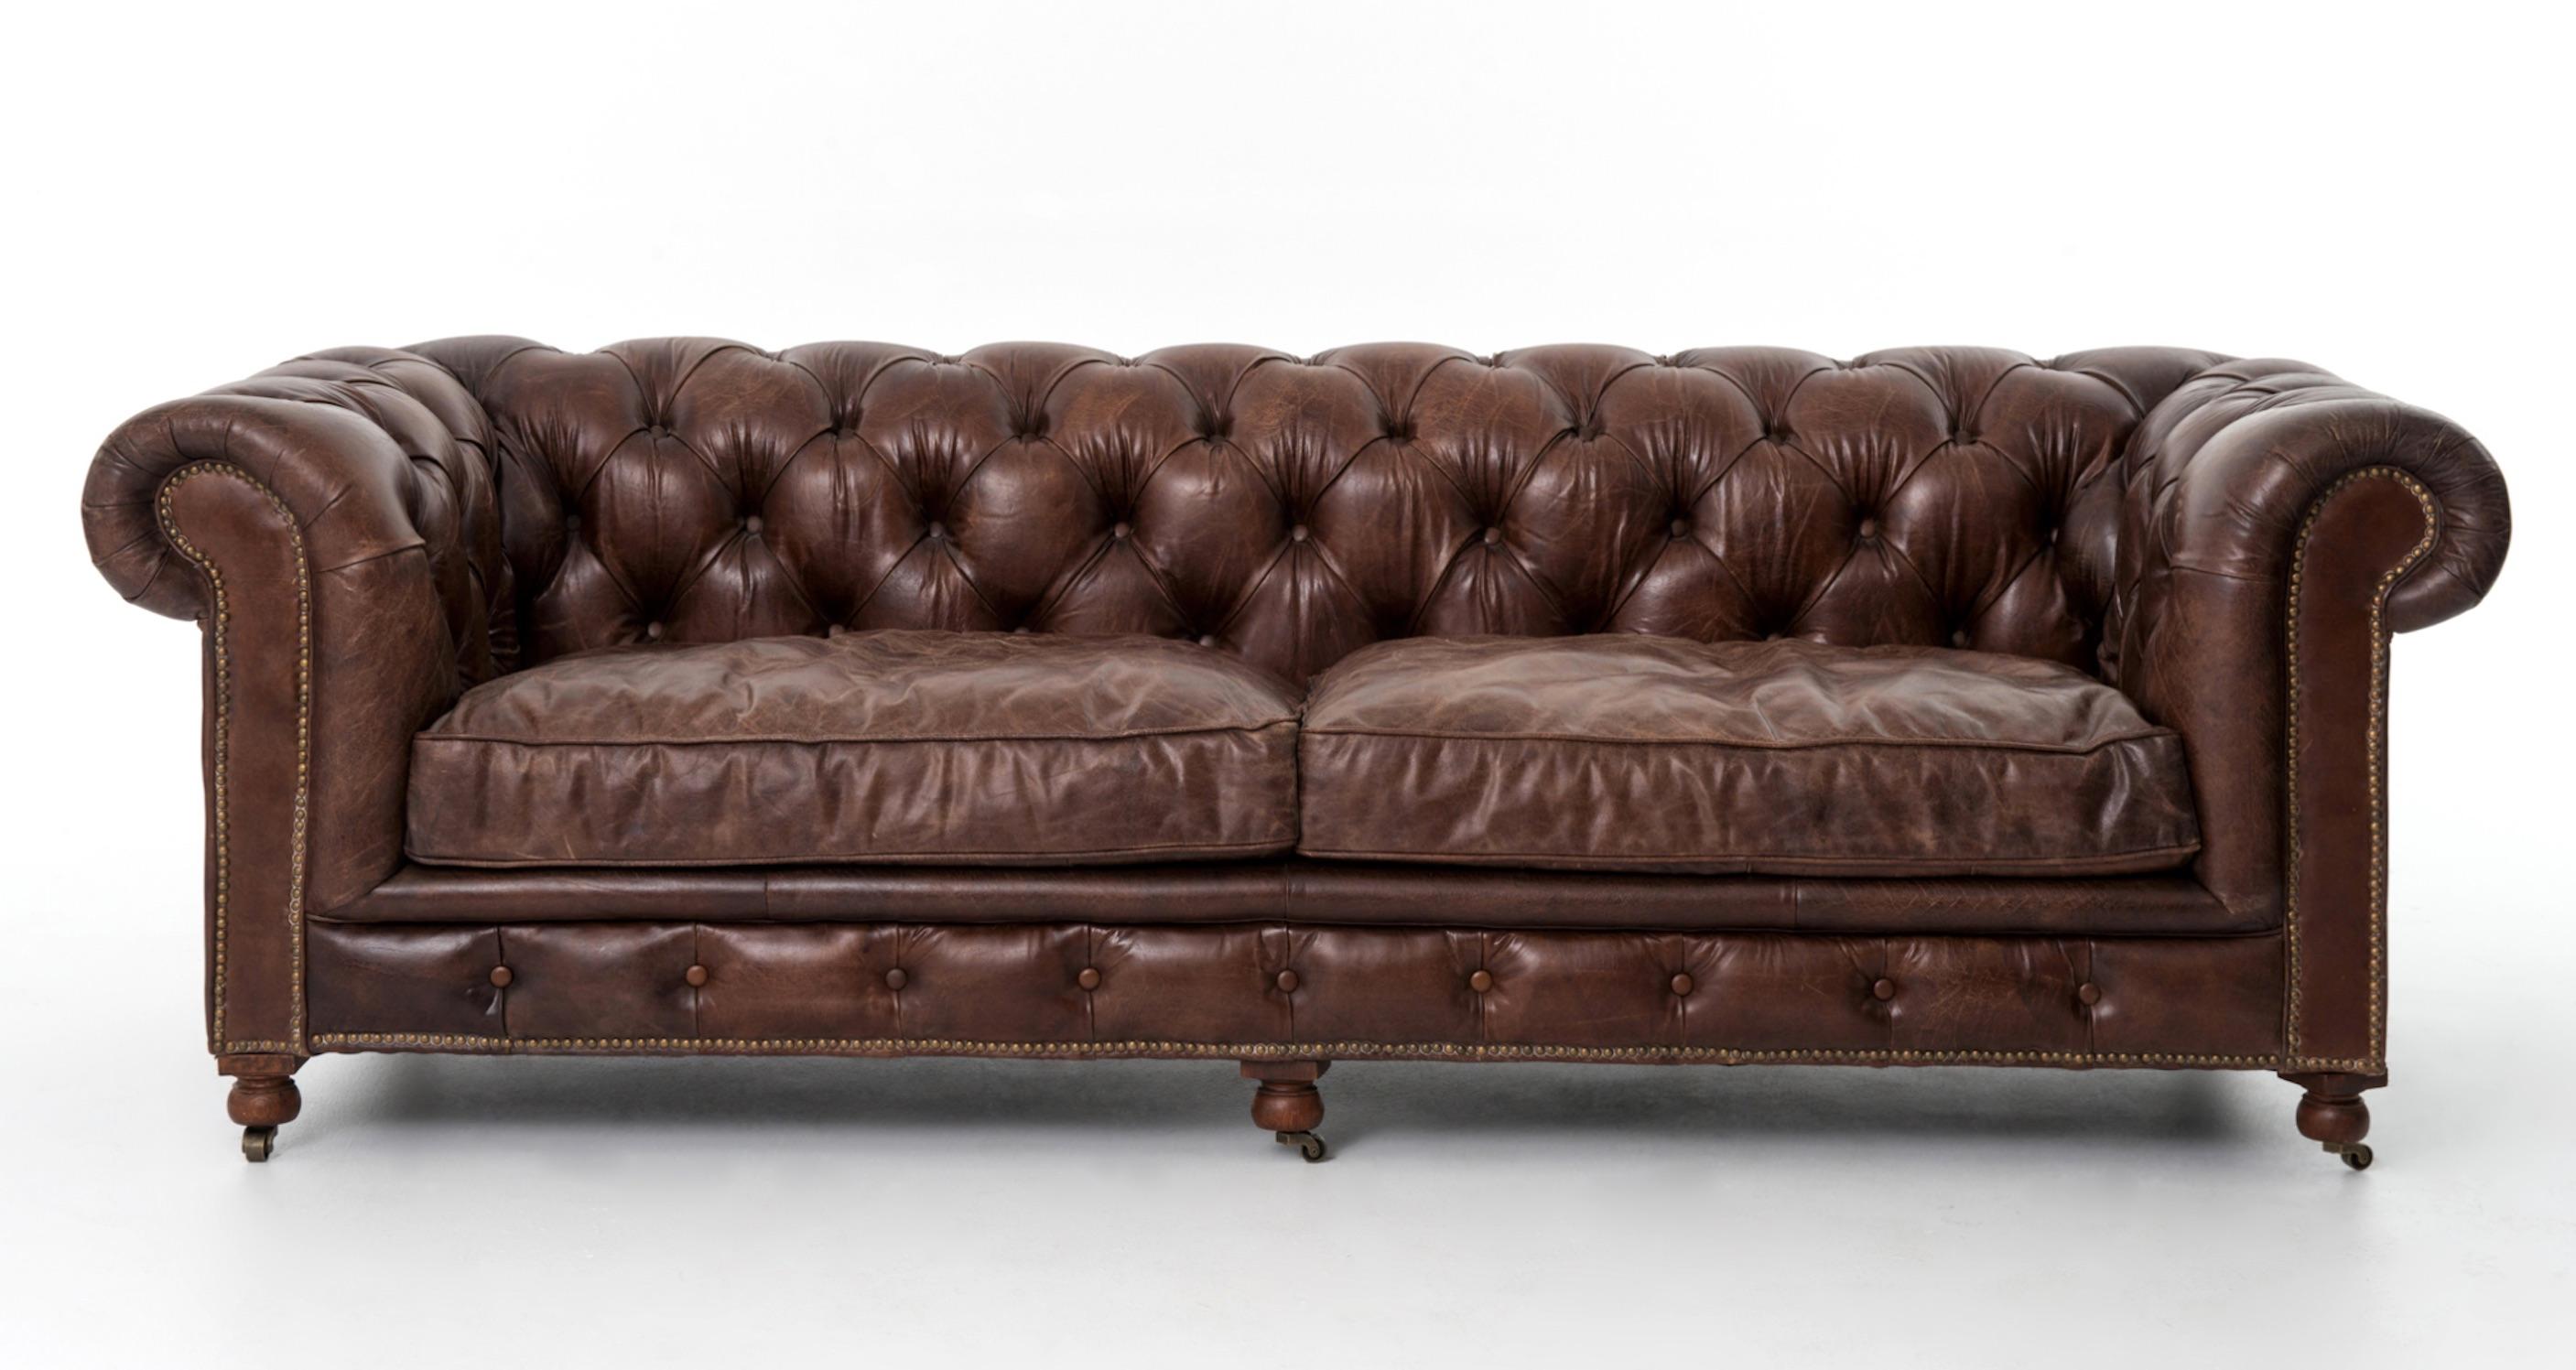 Pair of Monumental Distressed Leather Chesterfield Sofas. Priced Per Sofa. 6